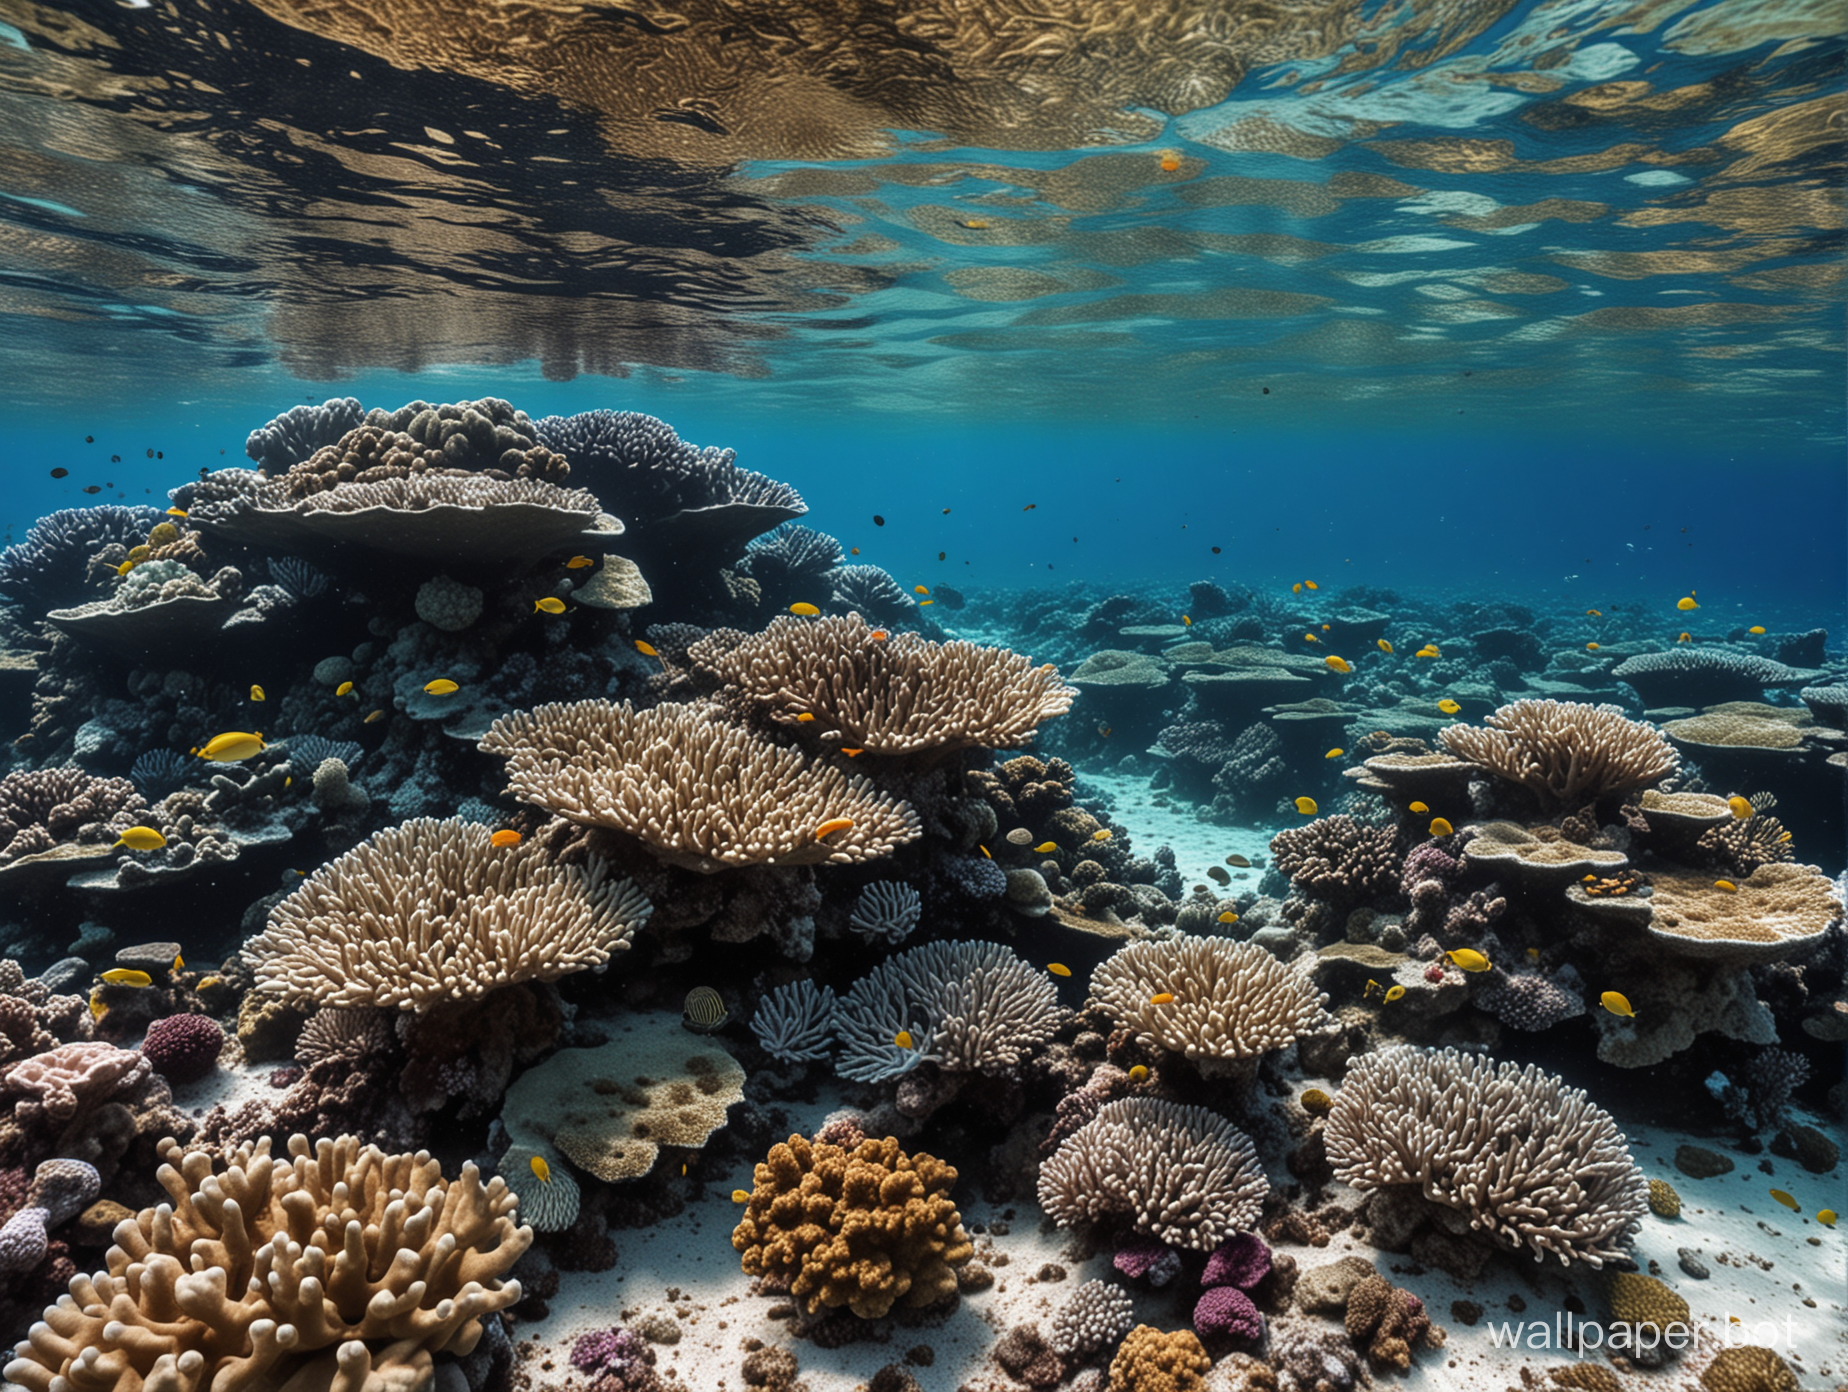 Coral reef without fish in 4K UHD. The coral reef has to be at least 7000 pixels wide and 1000 pixels in height